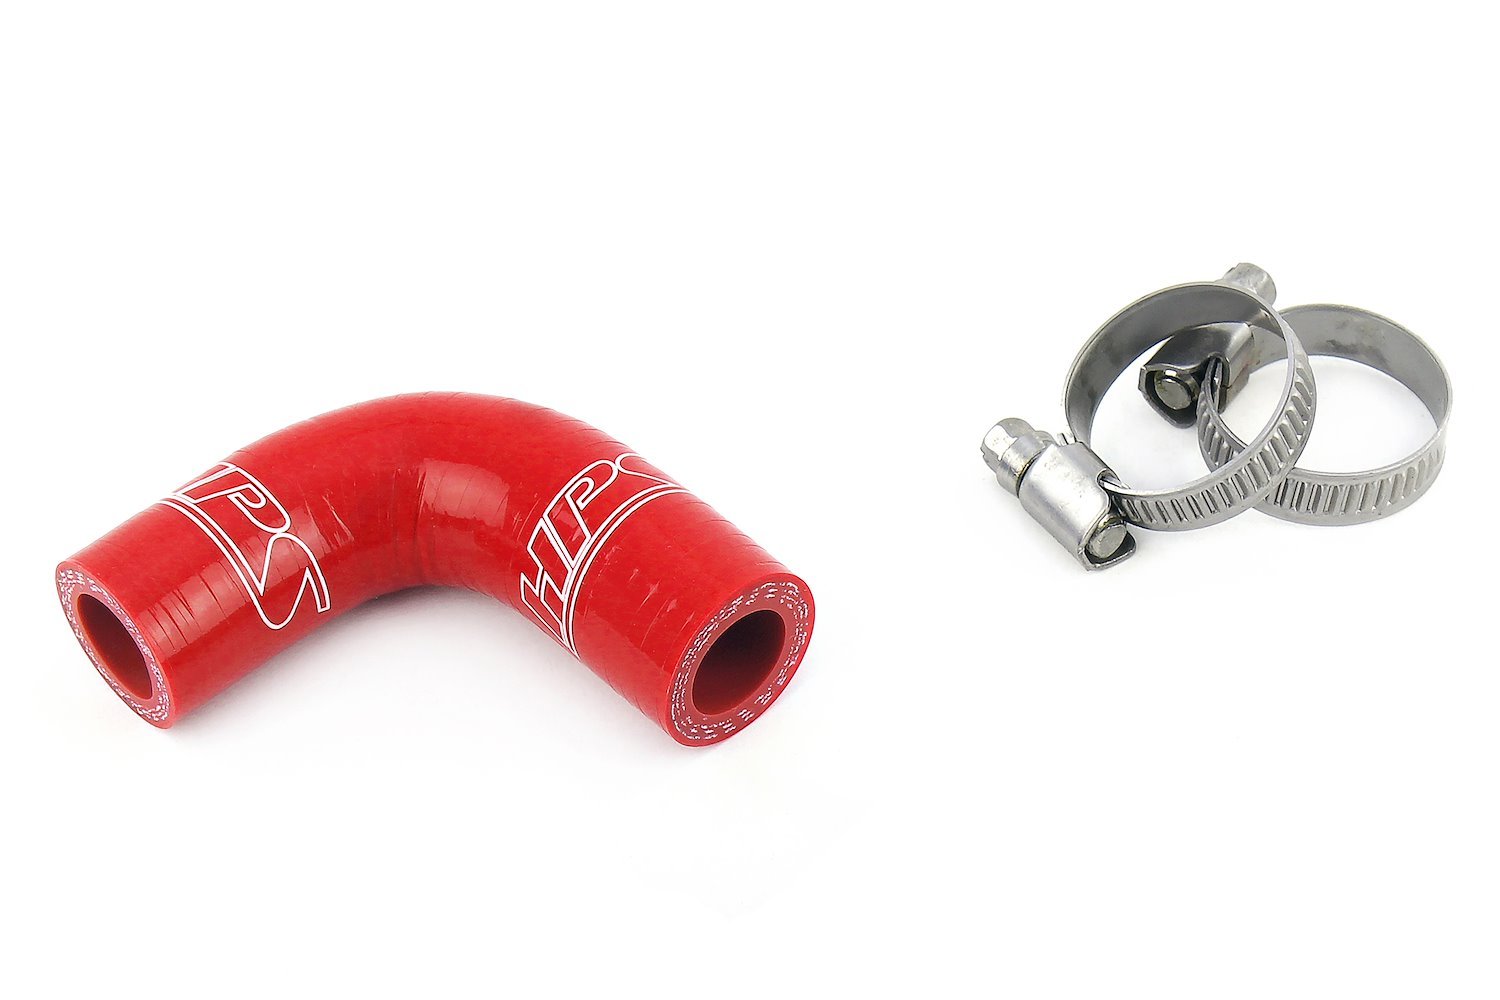 57-1881-RED Silicone Coolant Hose Kit, 3-Ply Reinforced Silicone, Replaces Rubber Heater & Transmission Coolant Hoses